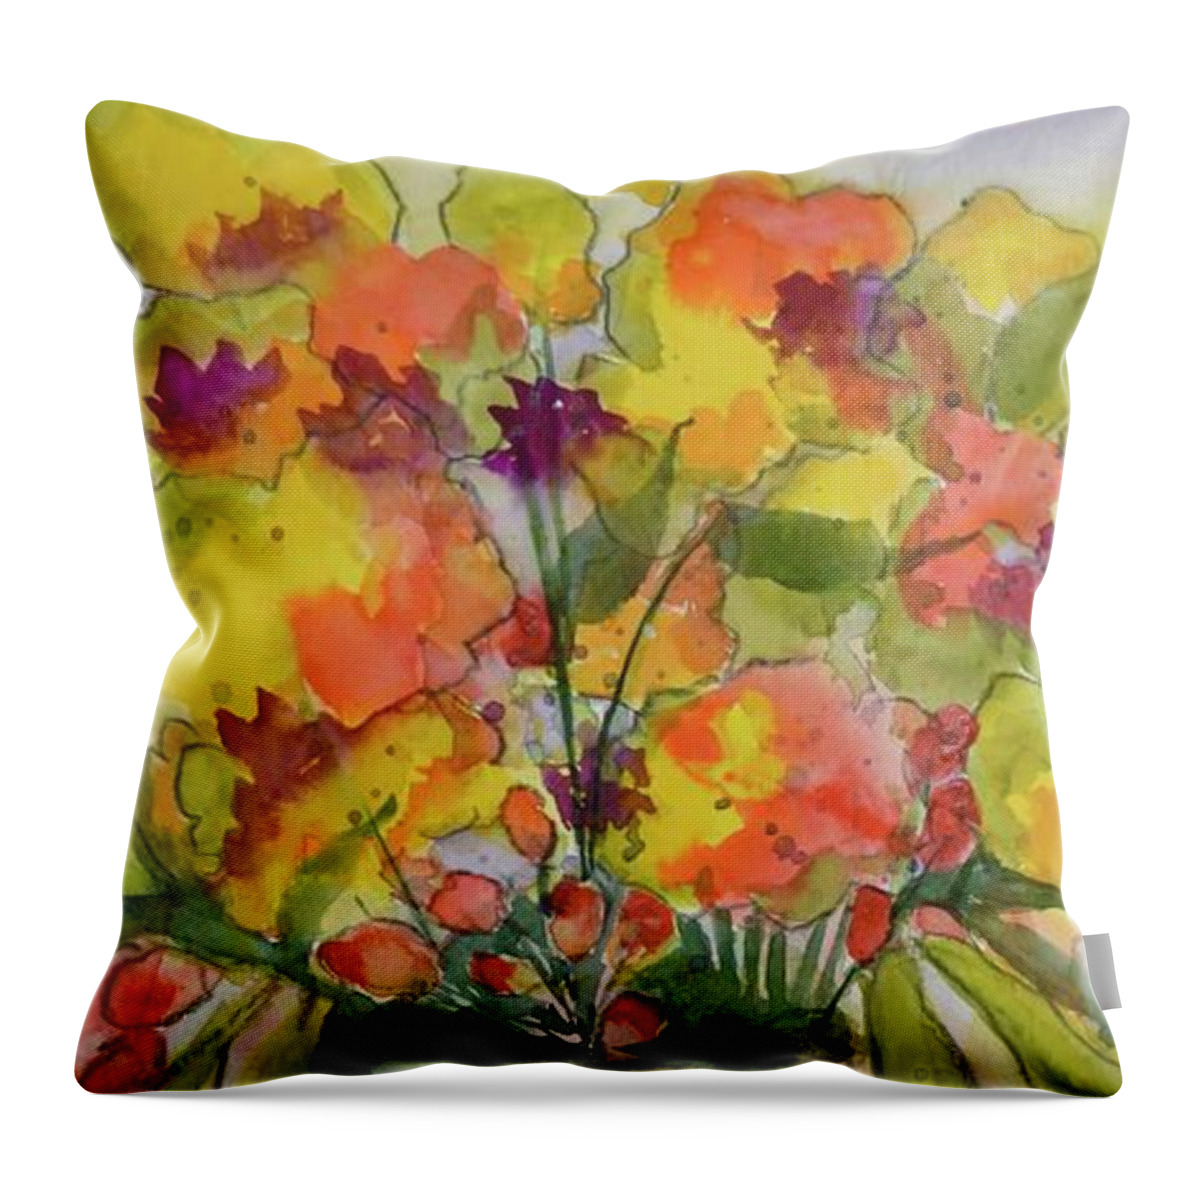  Throw Pillow featuring the painting Autumn Collage by Barrie Stark